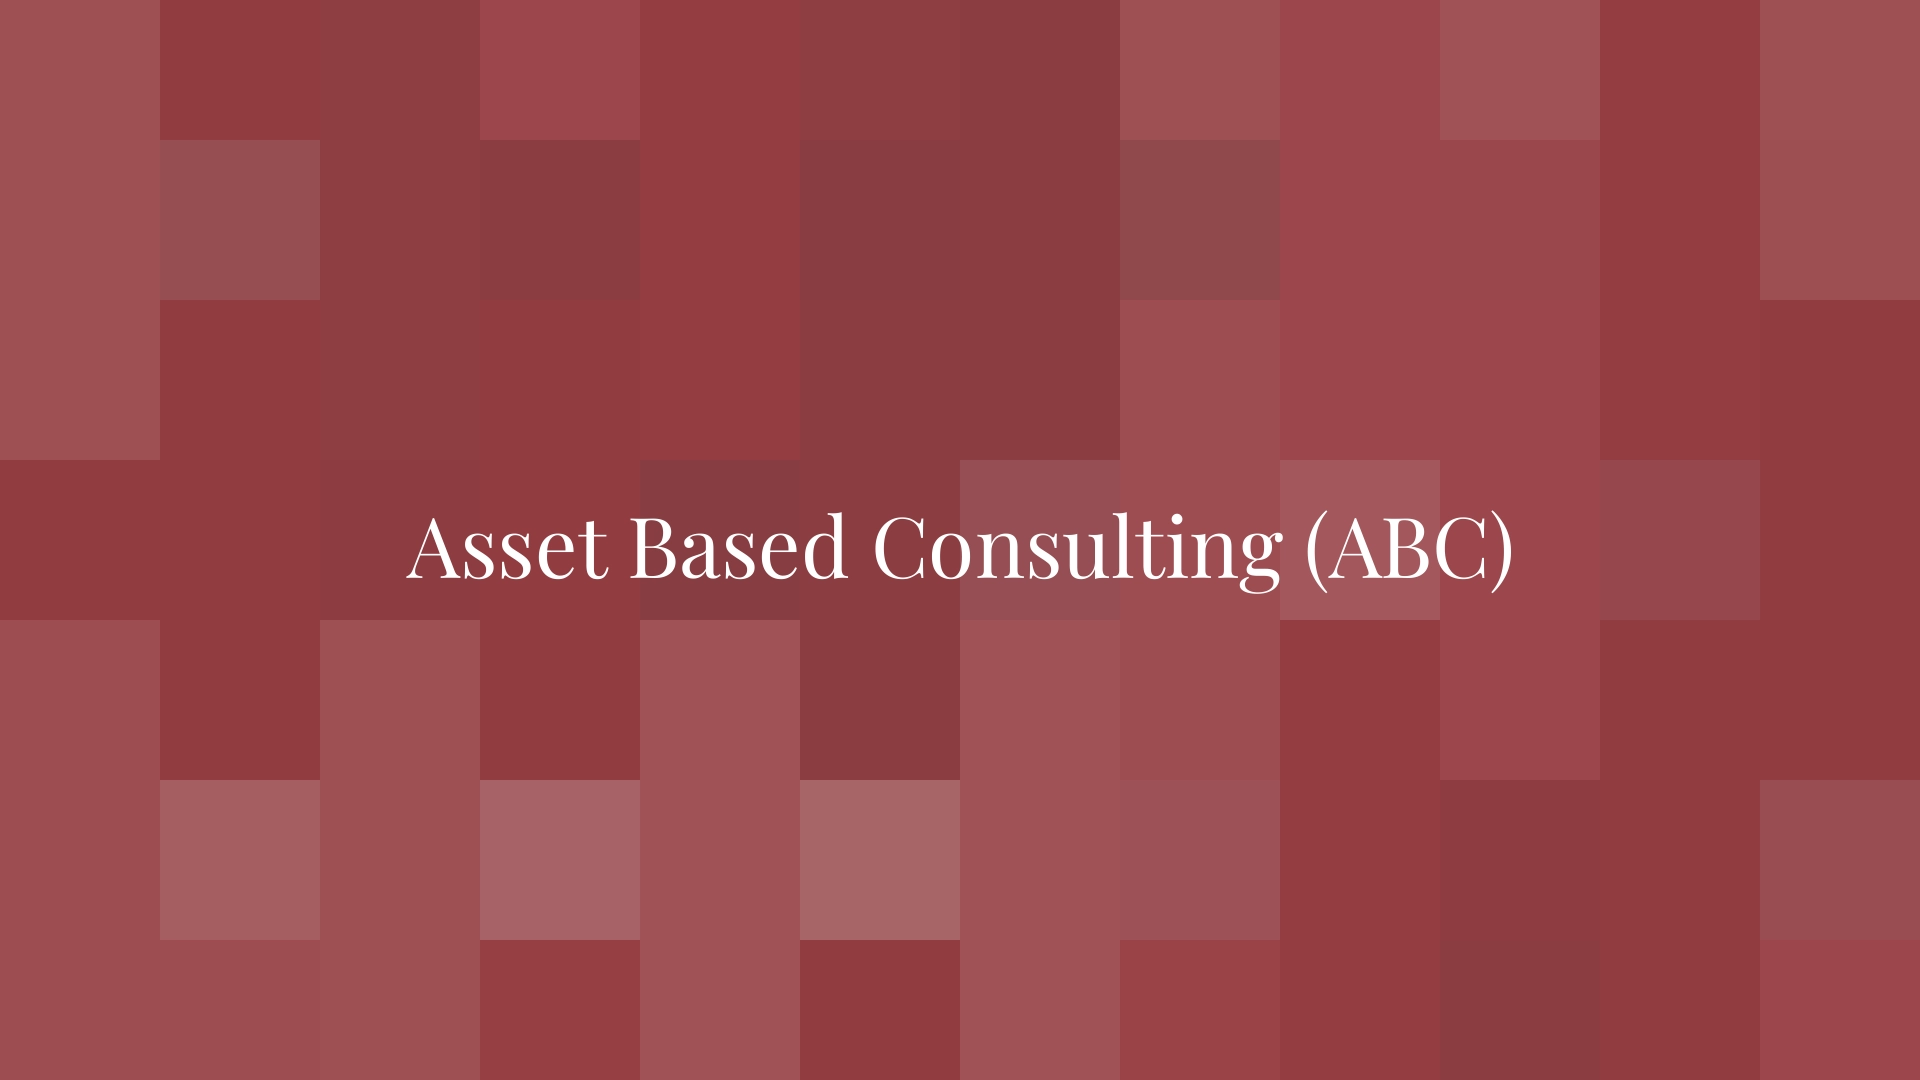 Asset Based Consulting (ABC)